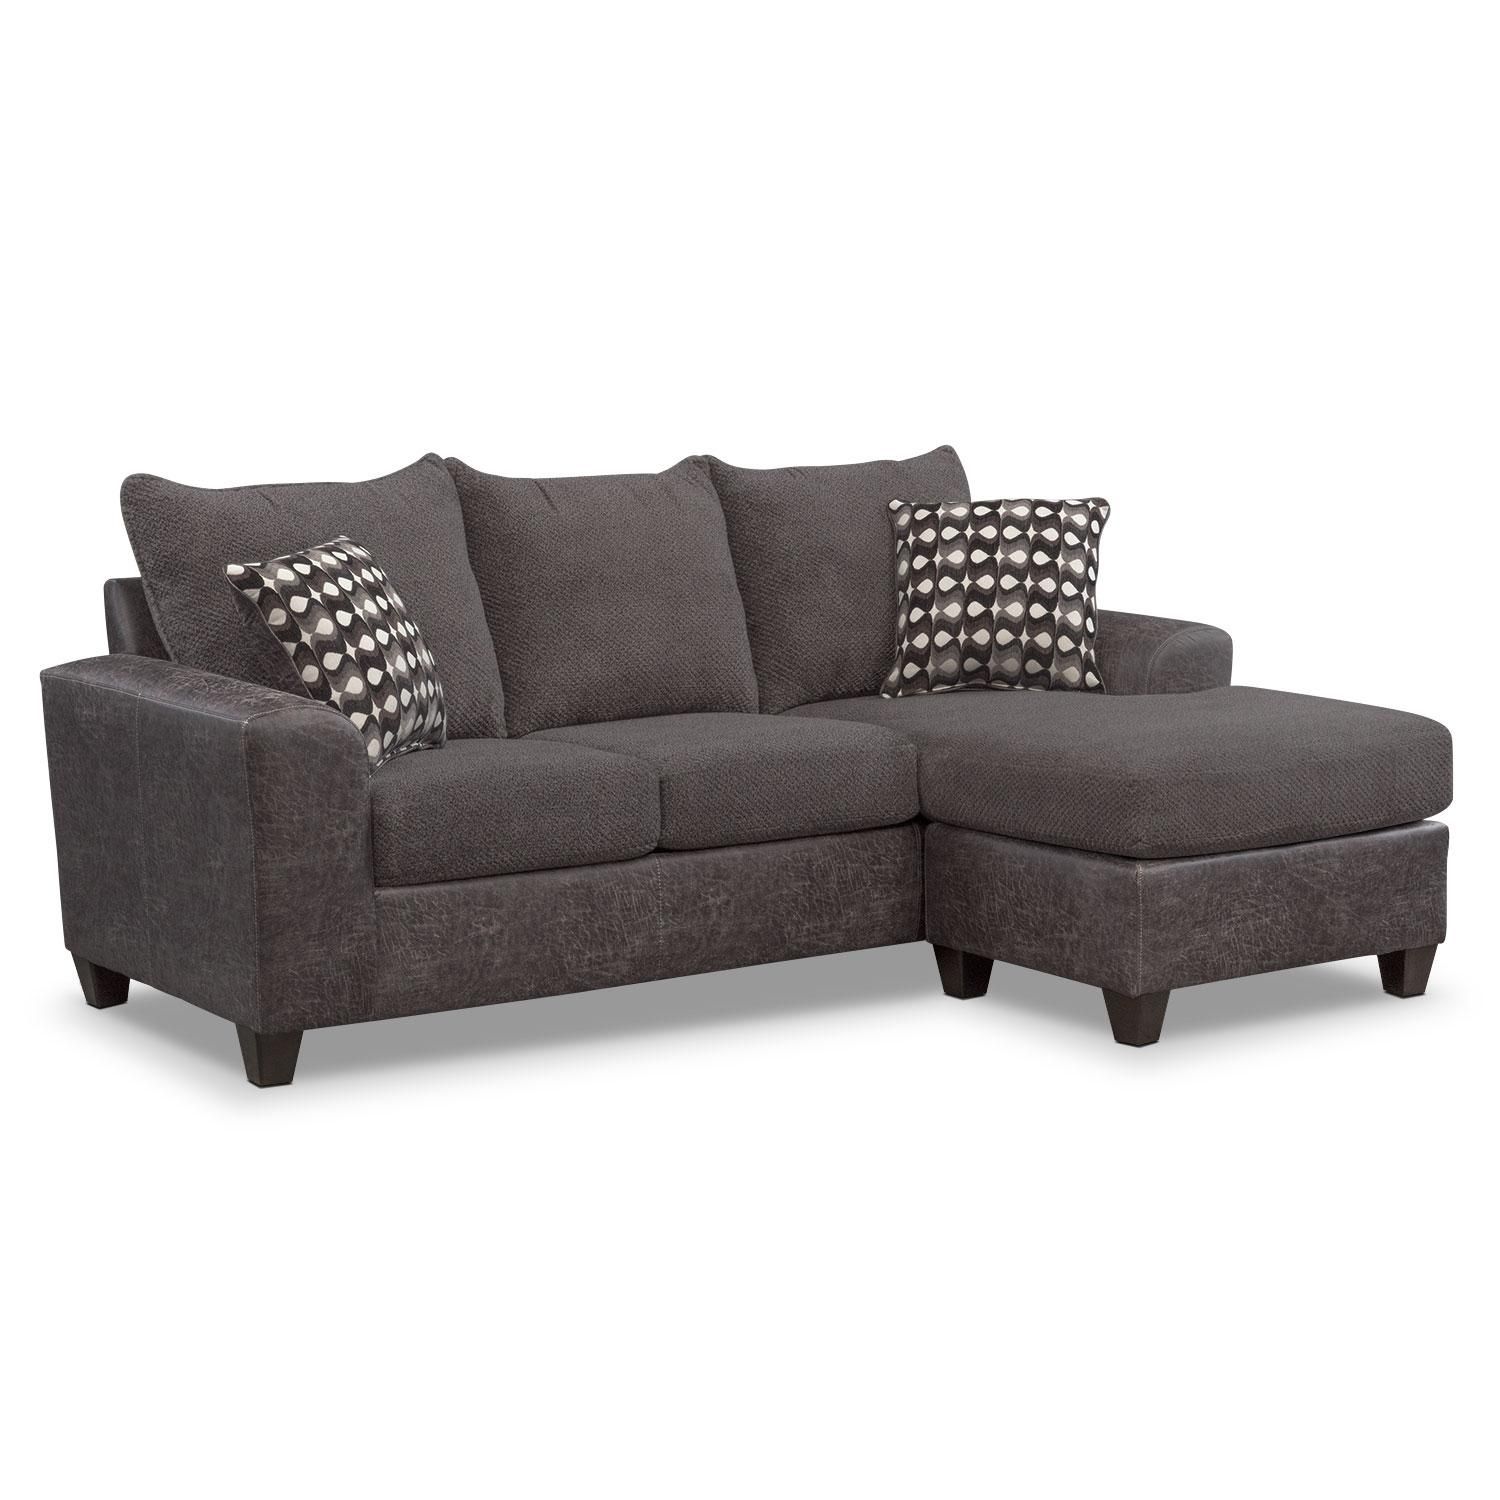 Sofas & Couches | Living Room Seating | Value City Furniture Regarding Sofas (View 11 of 20)